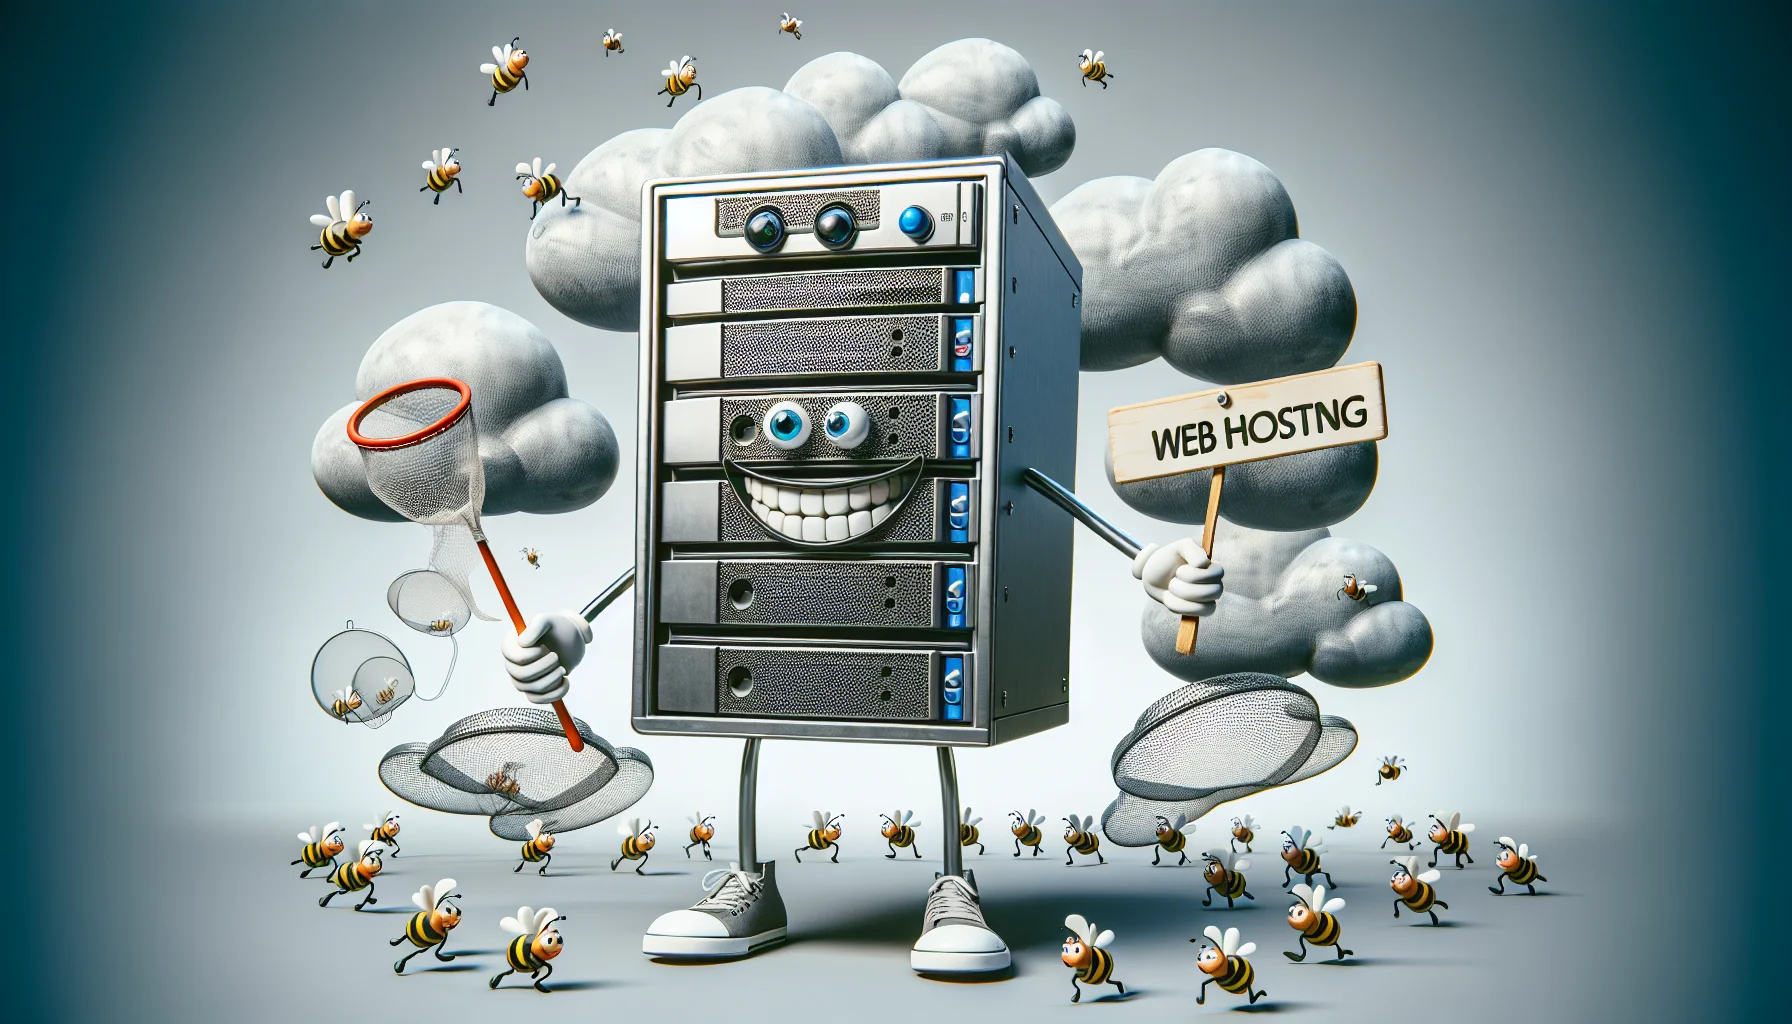 Visualize an eccentric scene based on the theme of web hosting. Focus on a highly detailed, realistic image of a dedicated server, which is personified and stands upright on two legs. It has a panel on the front (signifying the cPanel) that displays a broad smile and eyes full of character. It's holding a 'Web Hosting' sign in one hand and a net in another, playfully suggesting it's ready to 'catch' websites. Surround it with smaller cartoonish clouds, spinning around like busy worker bees, suggesting lightness and speed of the web hosting service.